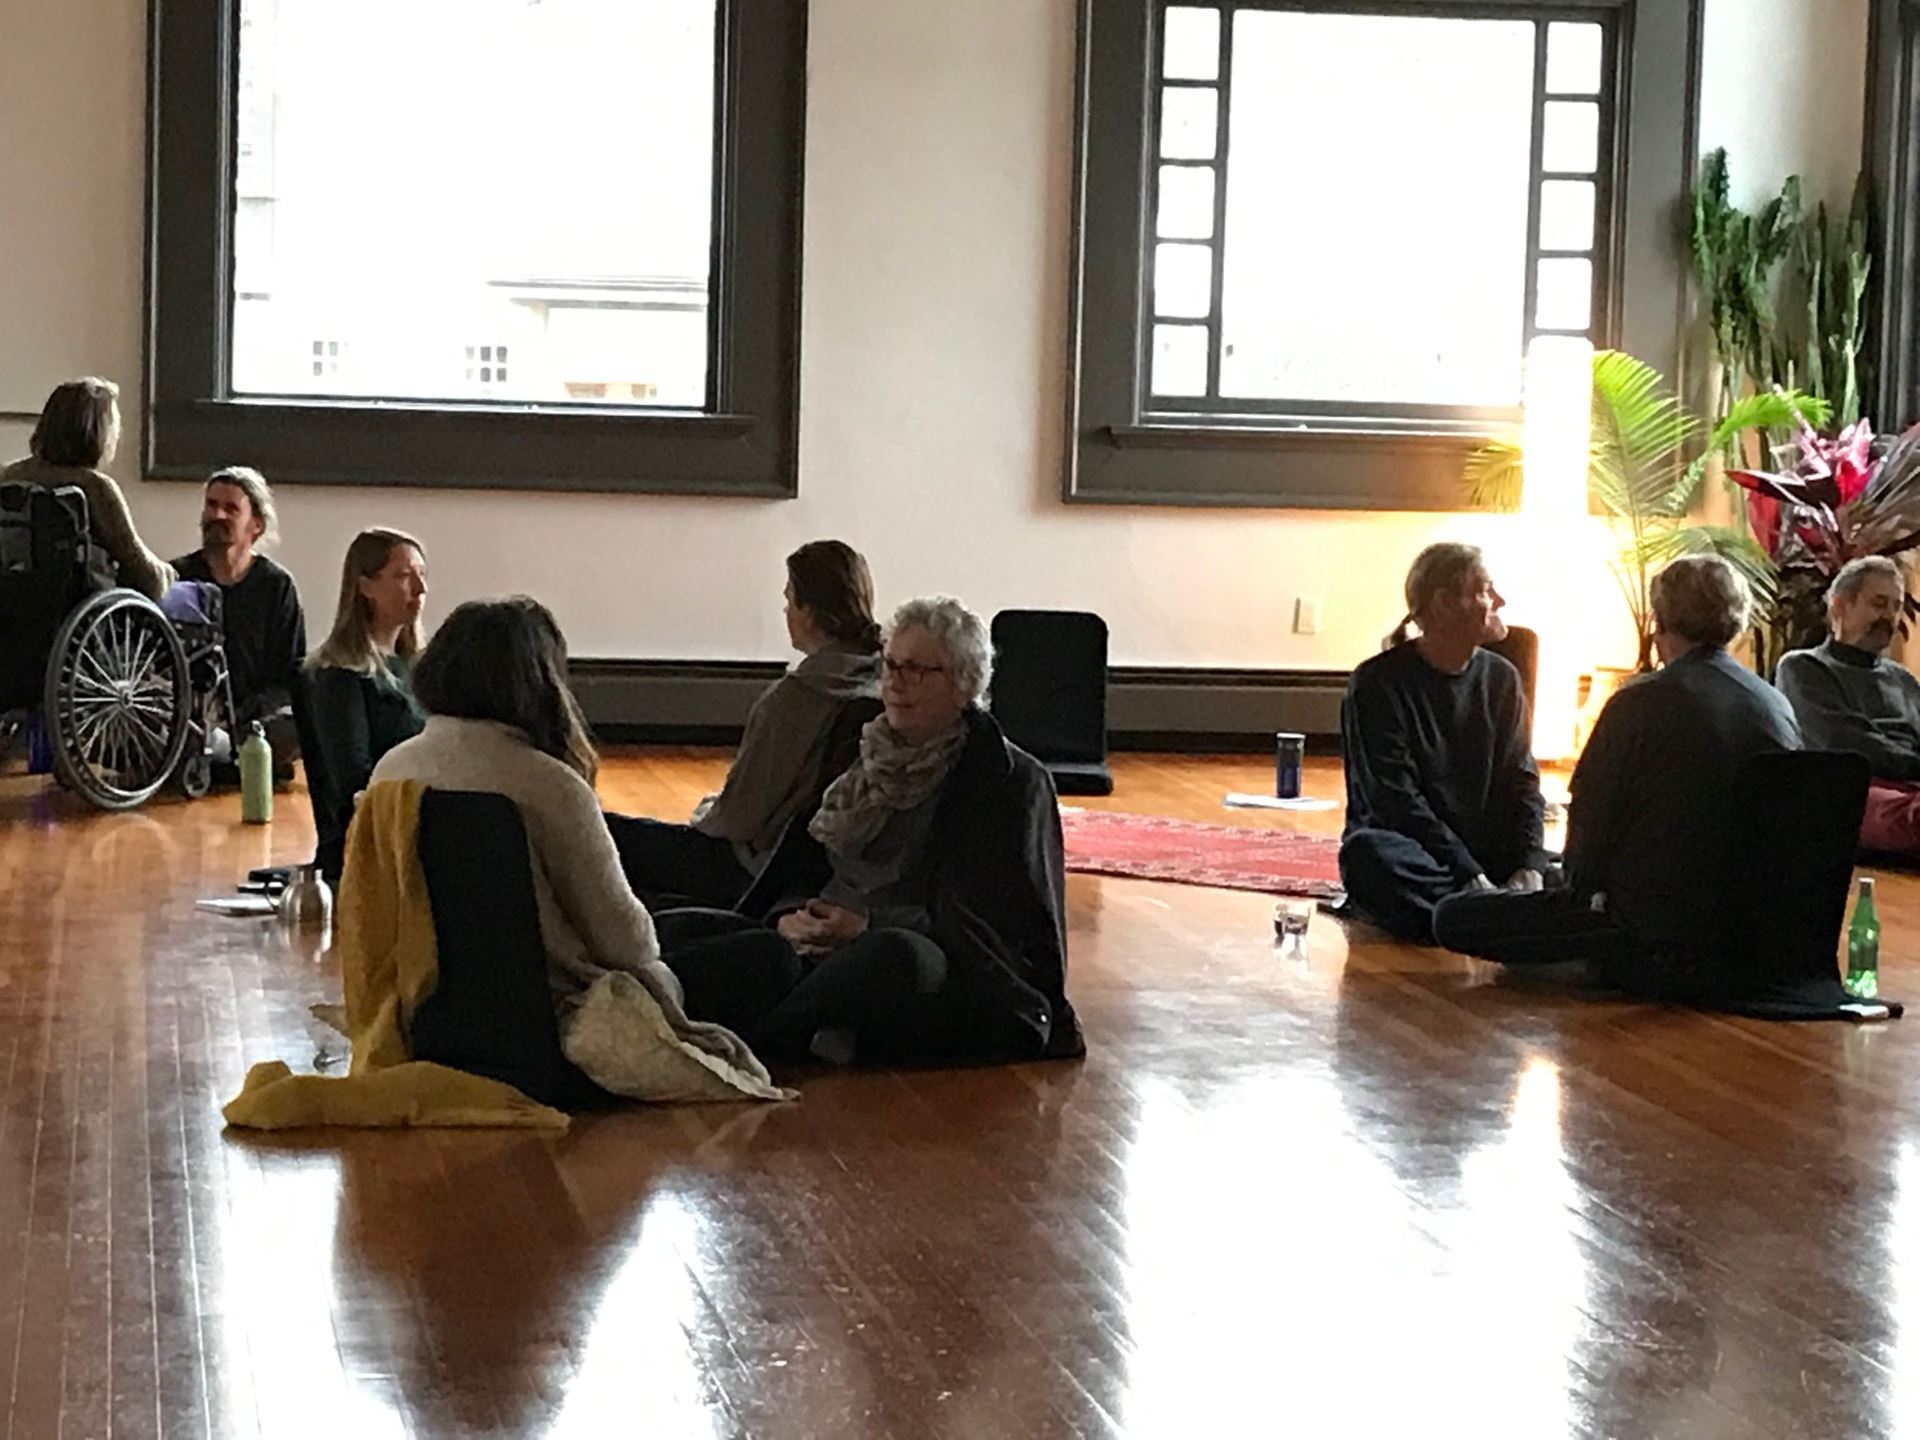 groups of people sitting together on wood floor, sun through windows 